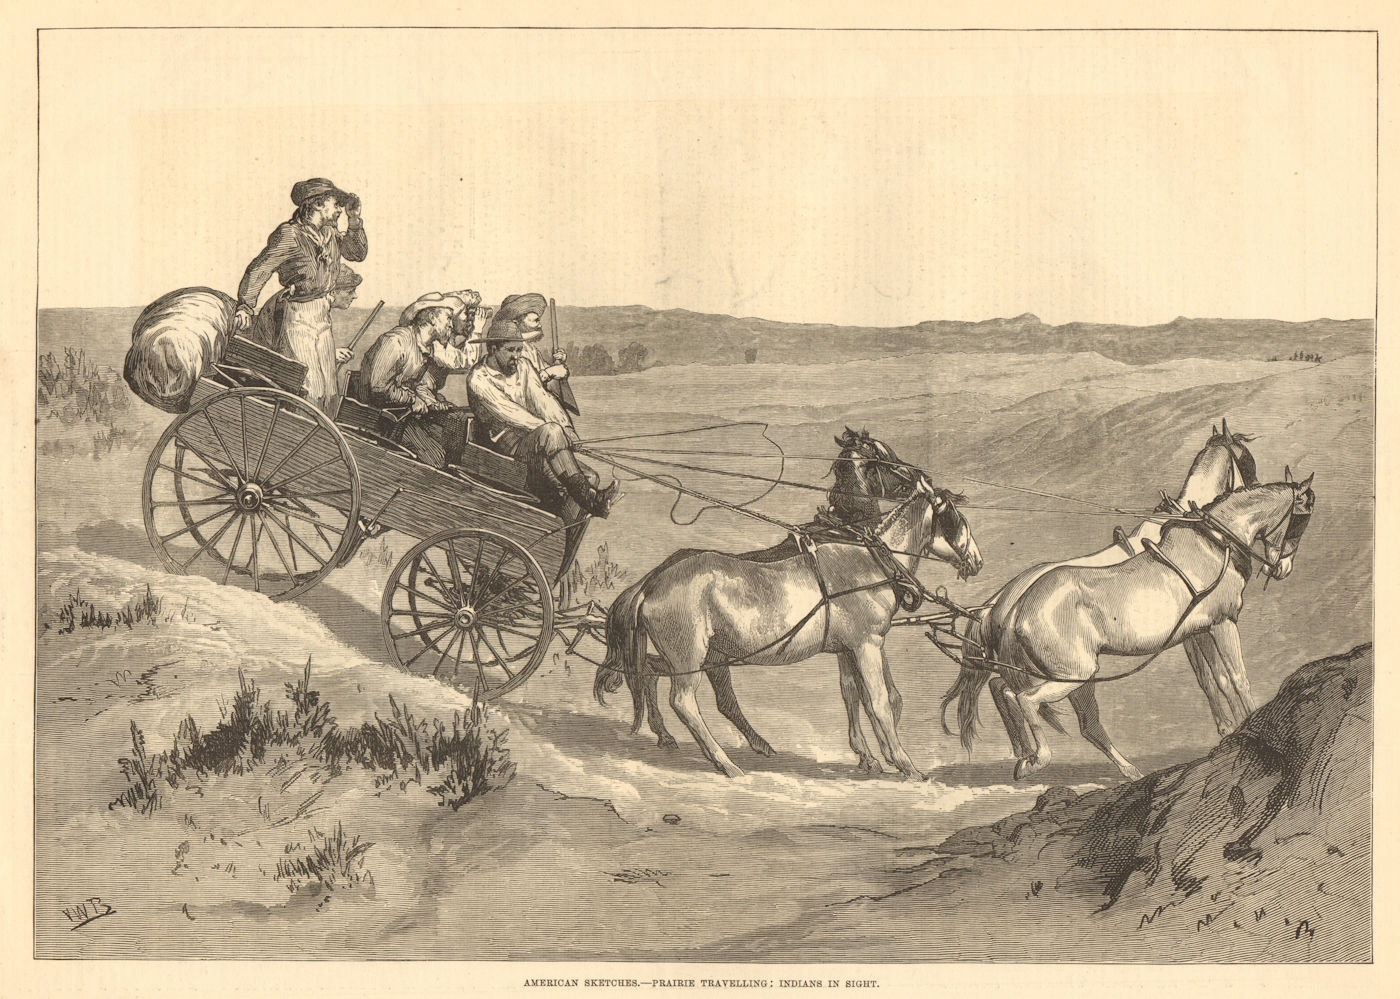 Prairie traveling: Native American Indians in sight. Wagon horses 1877 print